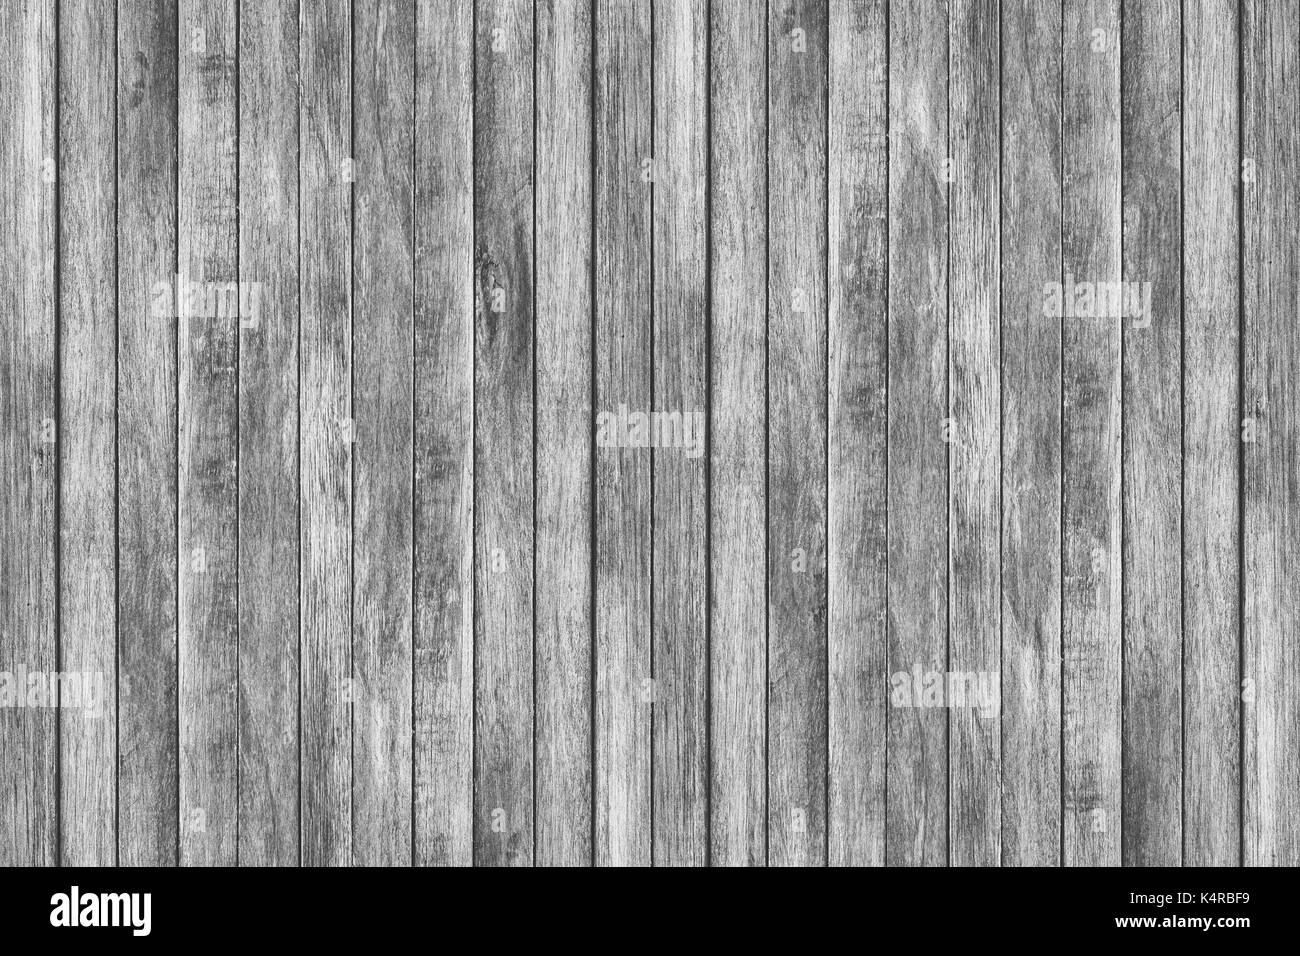 Abstract rustic surface dark wood table texture background. Close up rustic  dark wall made of white wood table planks texture. Rustic dark wood table  Stock Photo - Alamy